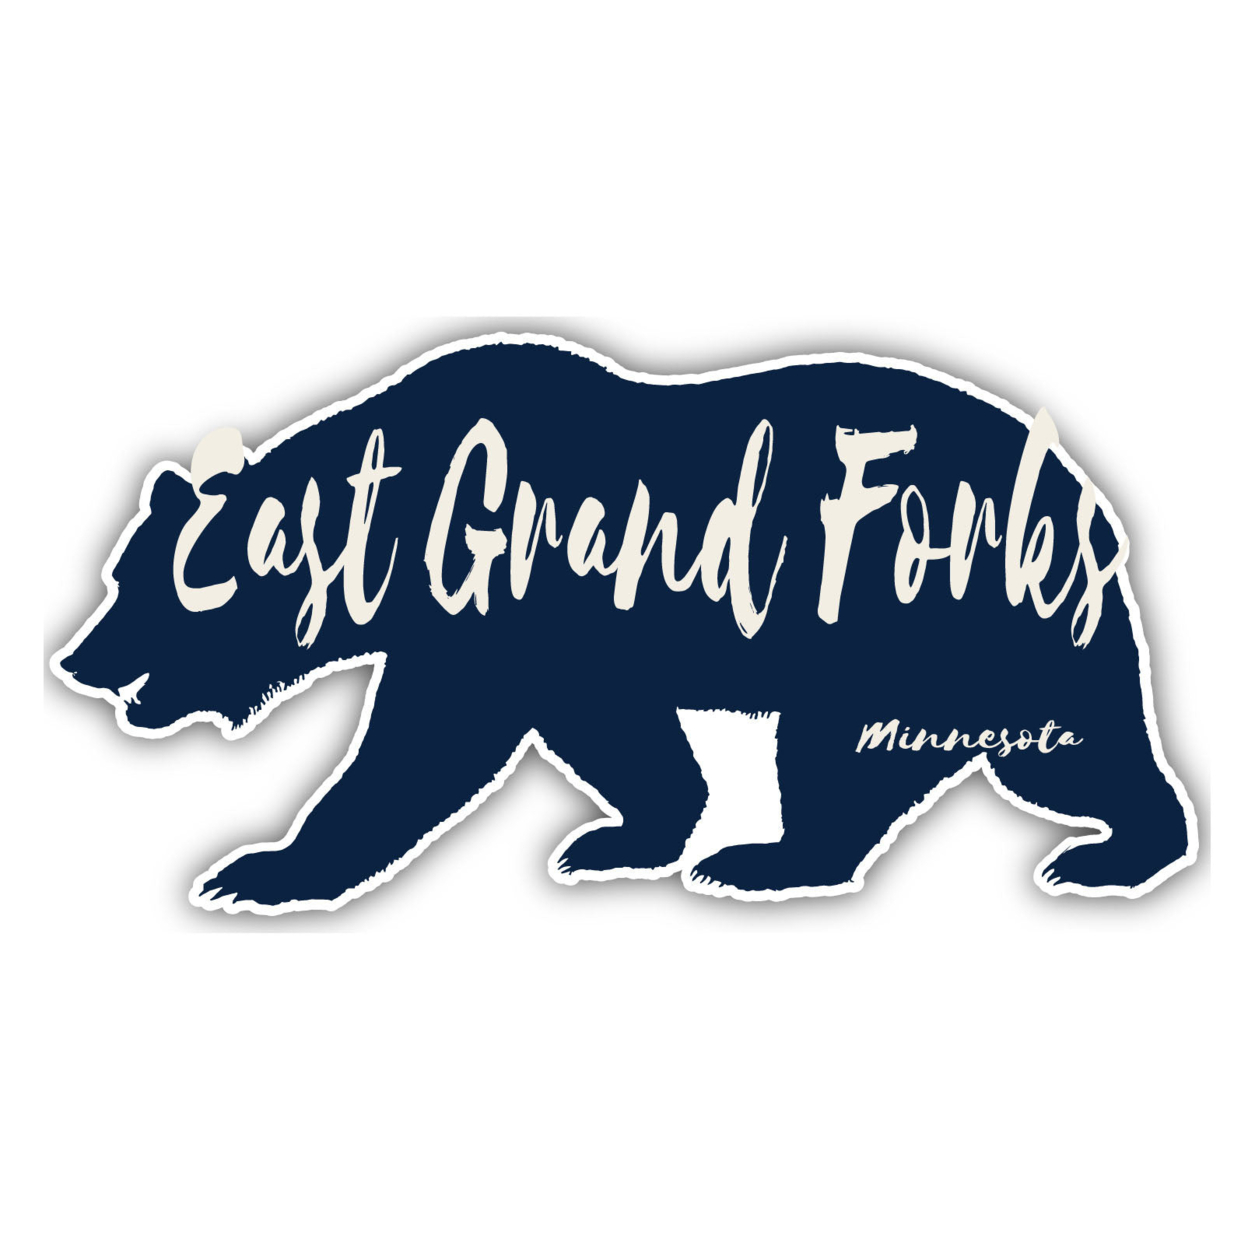 East Grand Forks Minnesota Souvenir Decorative Stickers (Choose Theme And Size) - 4-Pack, 2-Inch, Tent